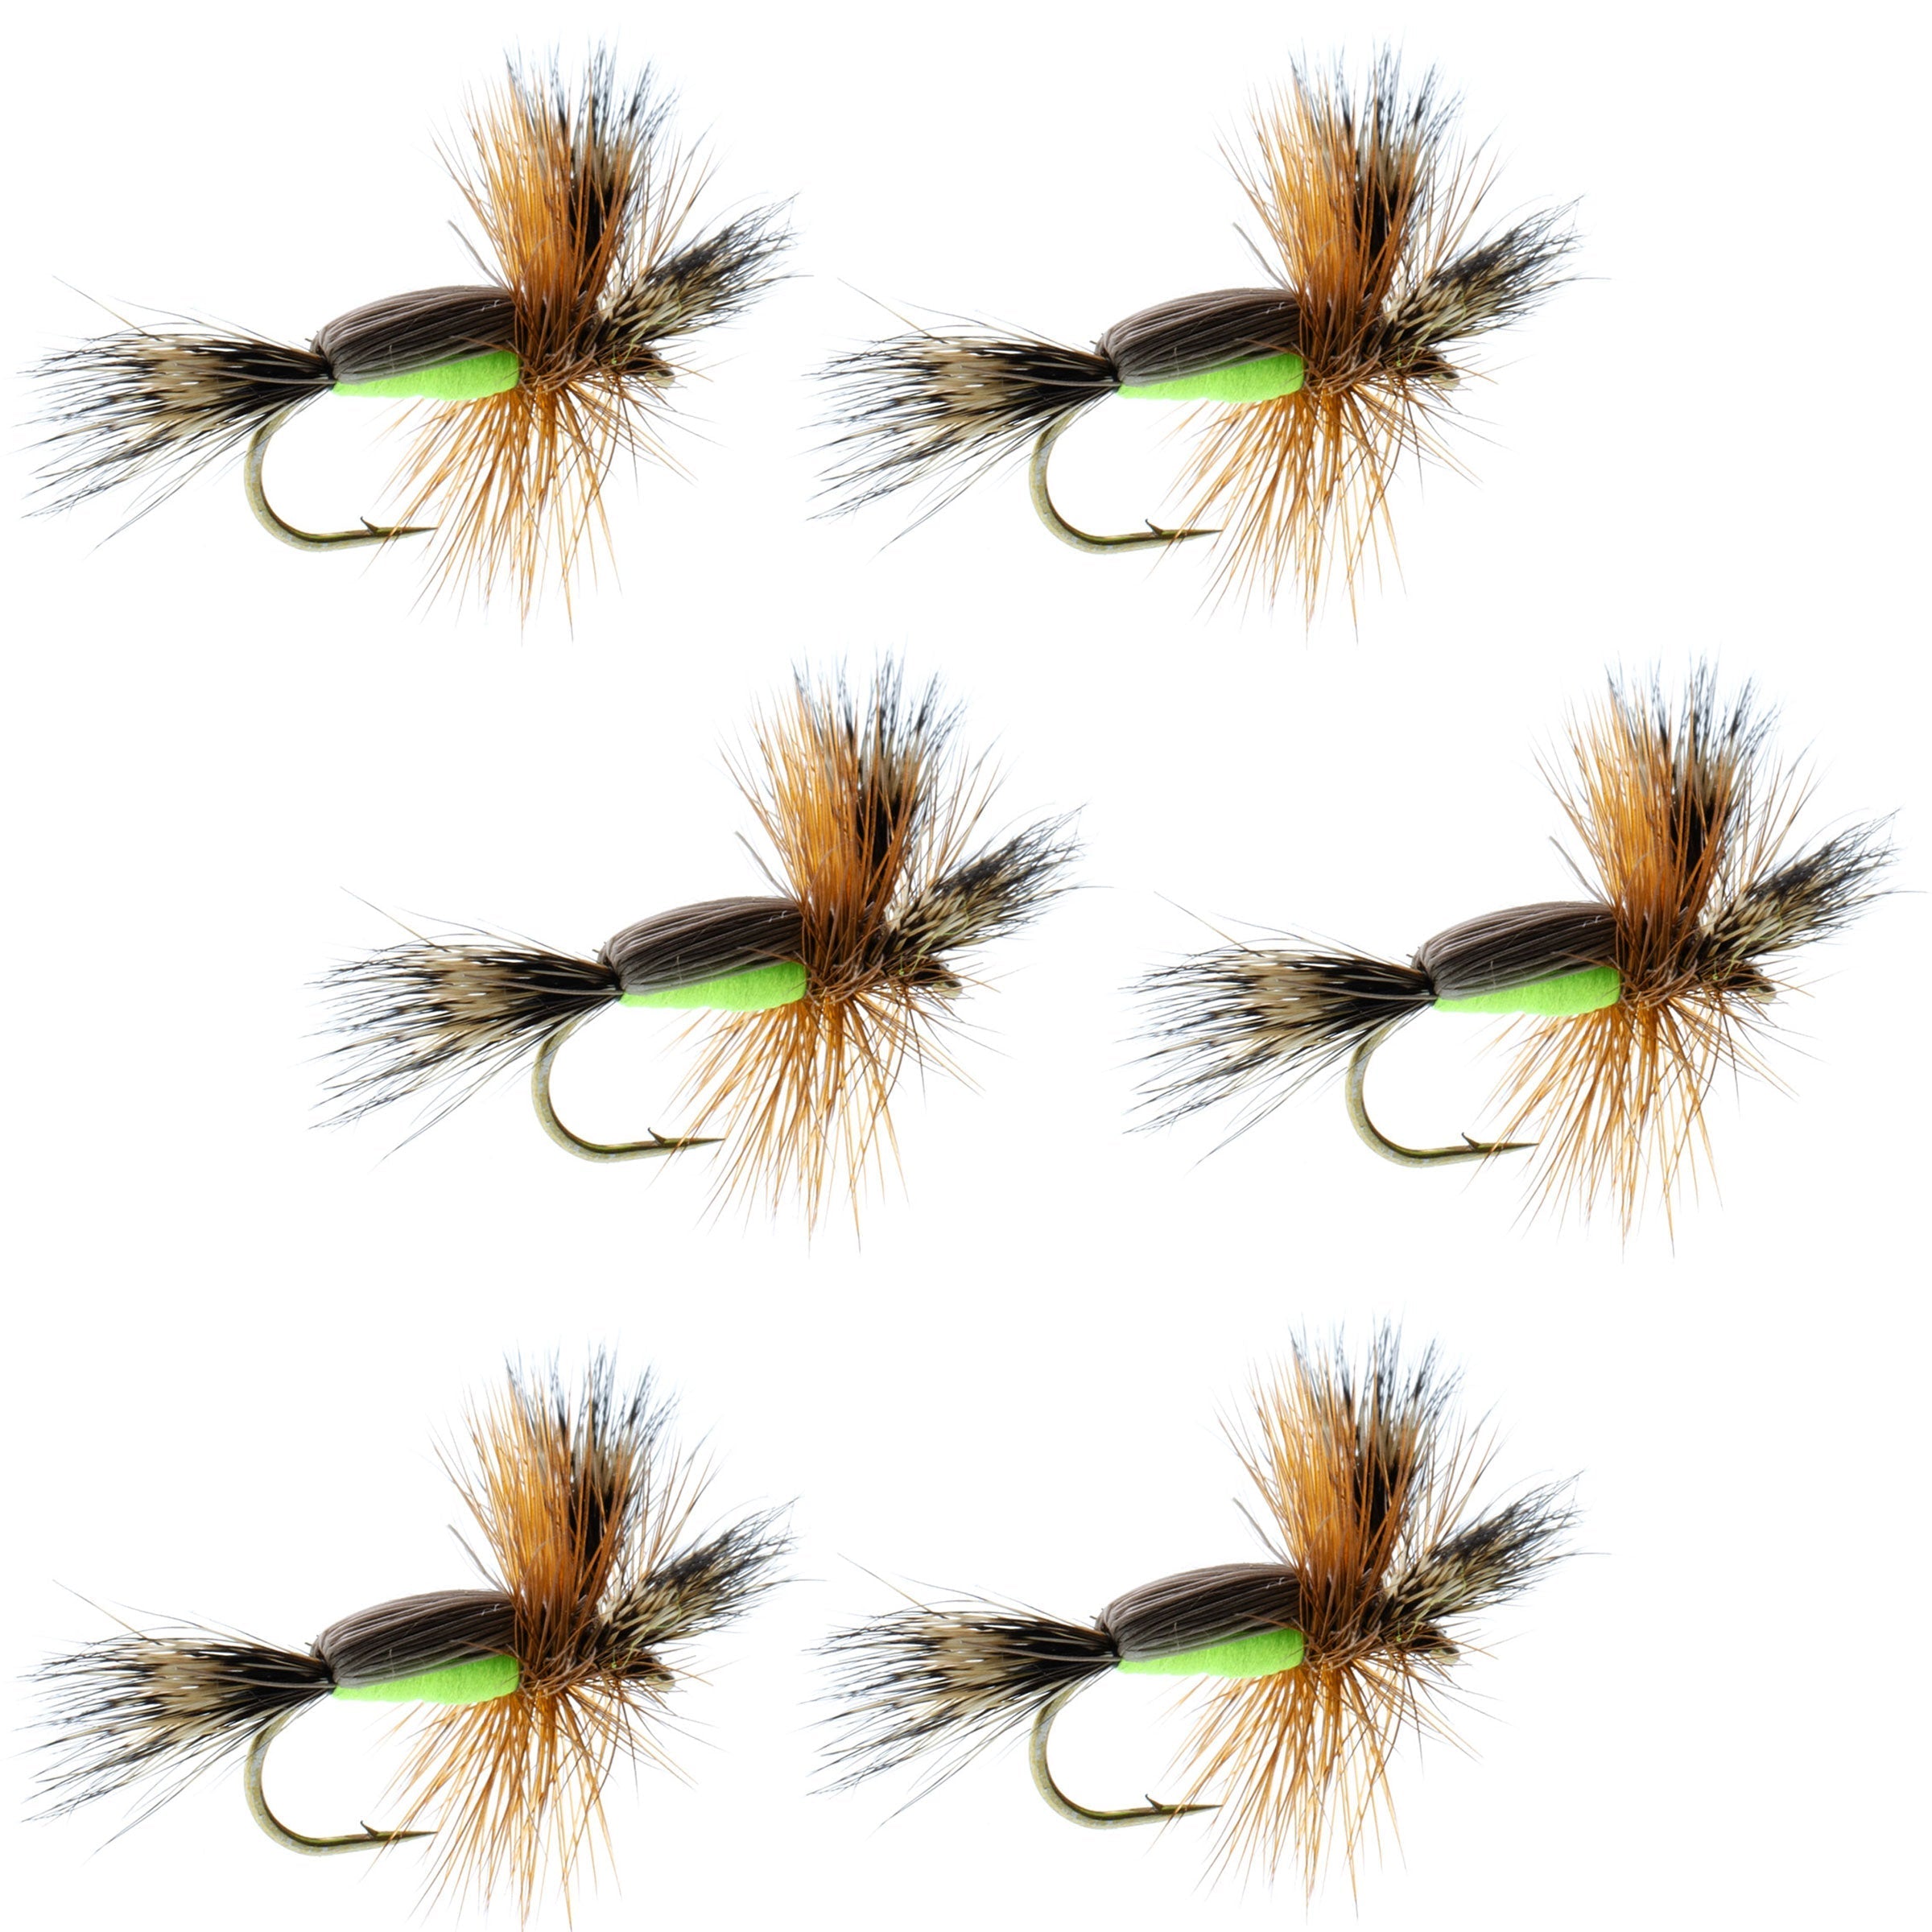 Chartreuse Humpy Classic Hair Wing Dry Fly - 6 Flies Hook Size 12